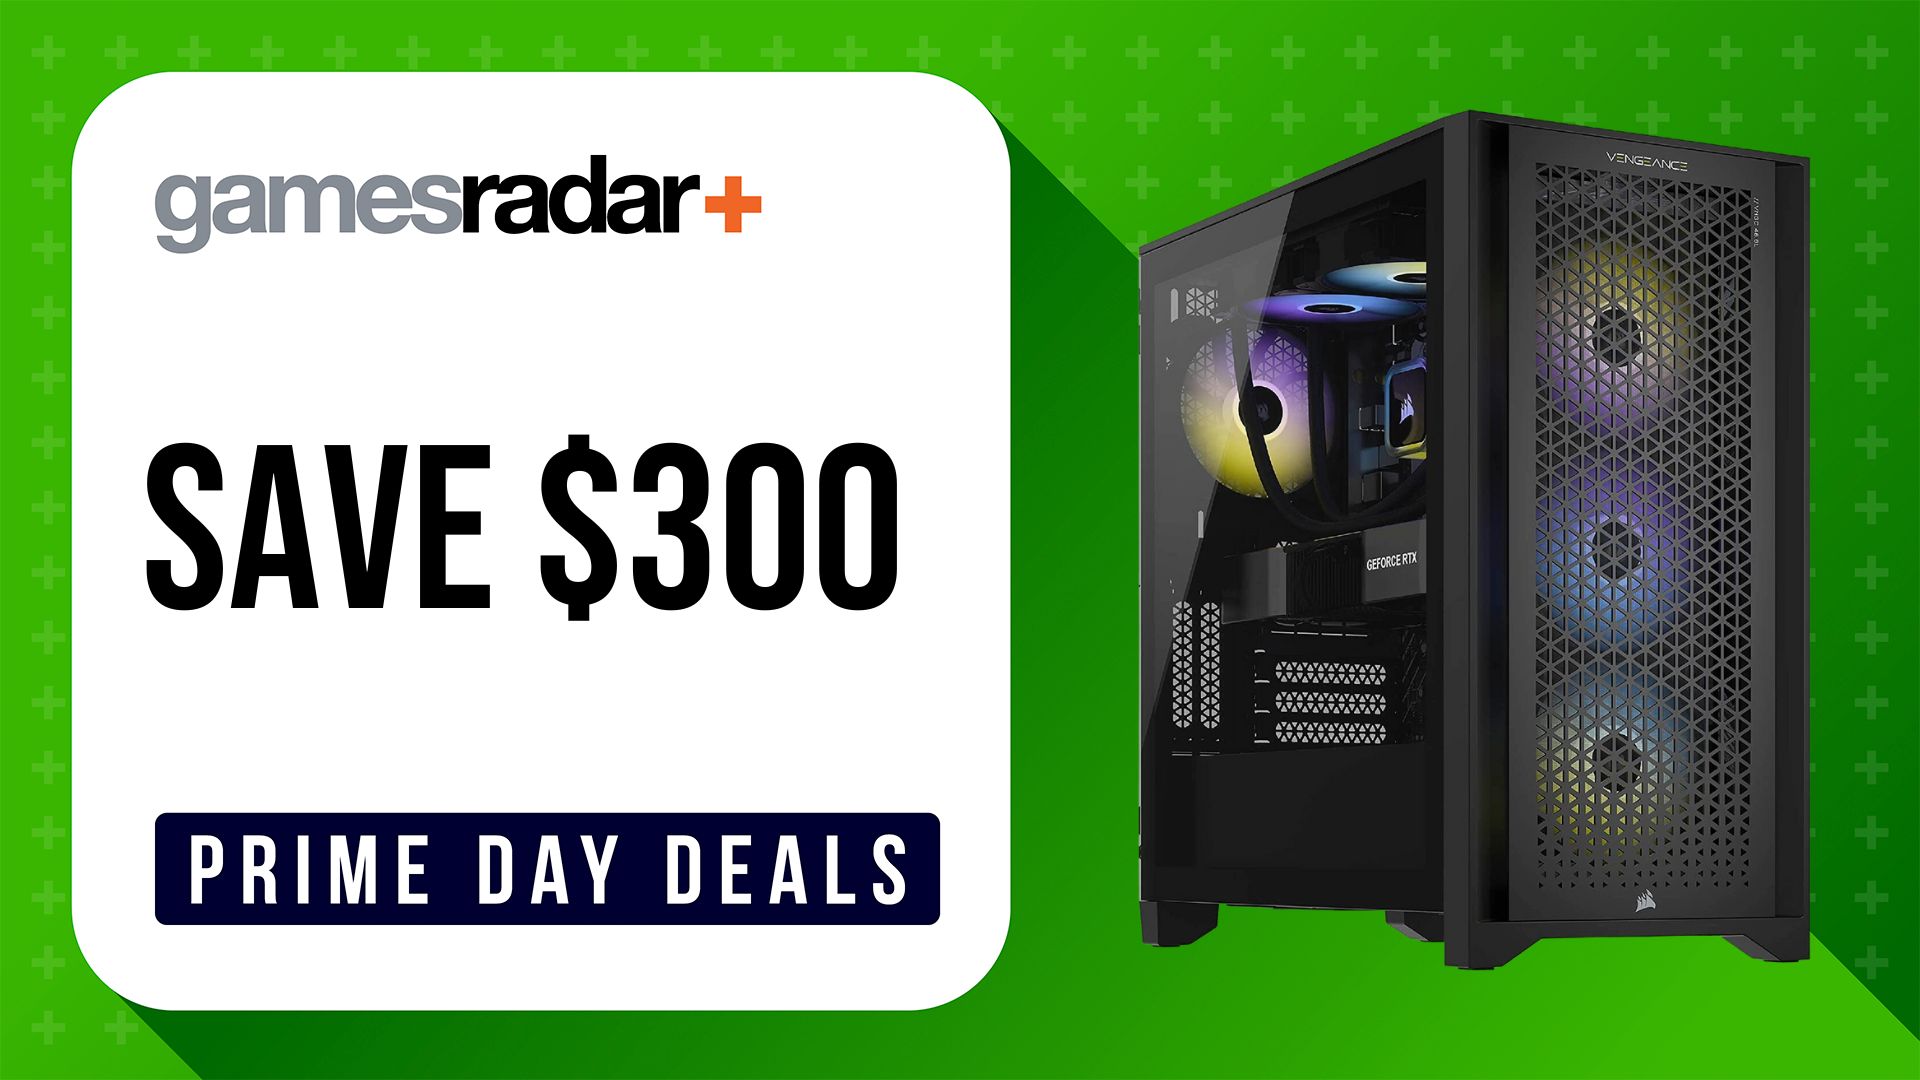 Corsair i7400 gaming desktop deal image on a green background with a save $300 stamp